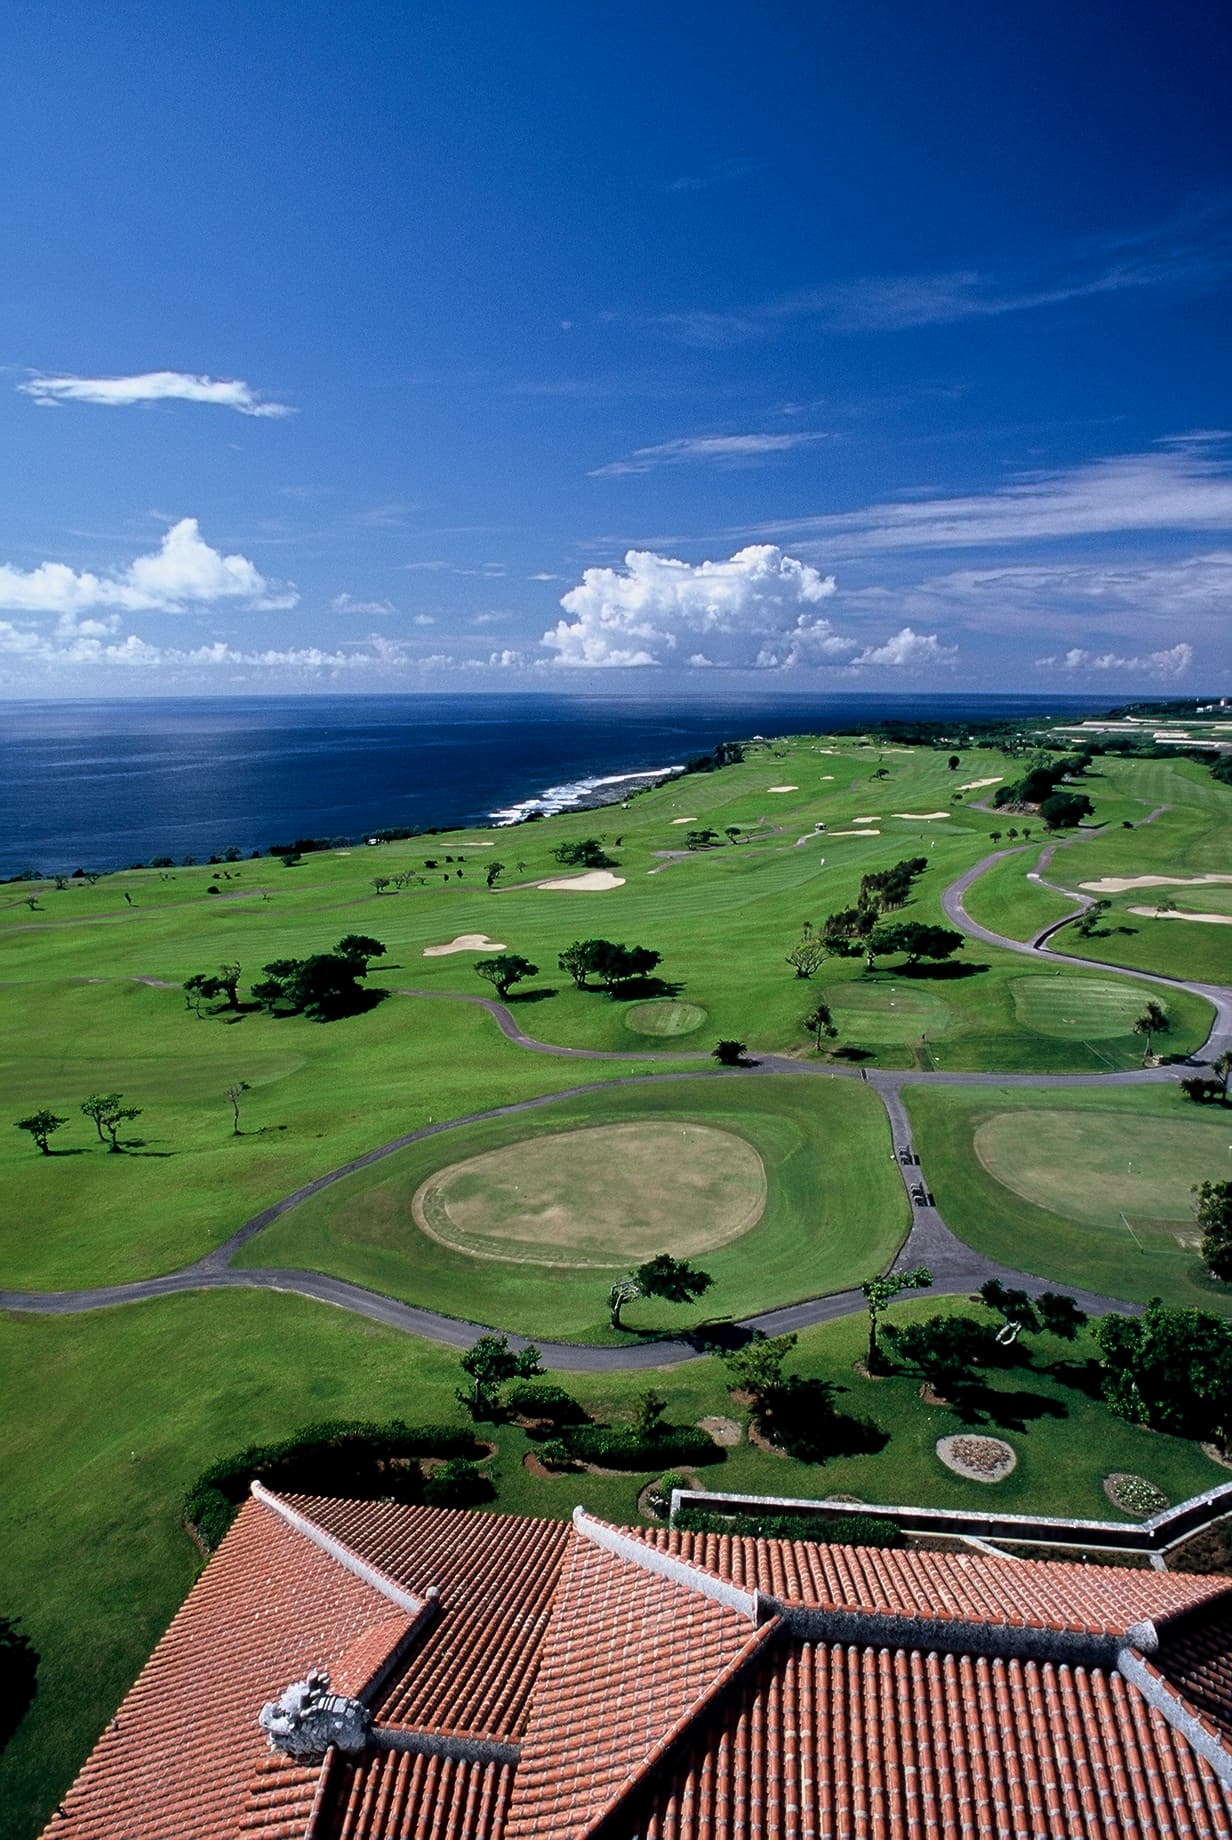 The Southern Links Resort Hotel